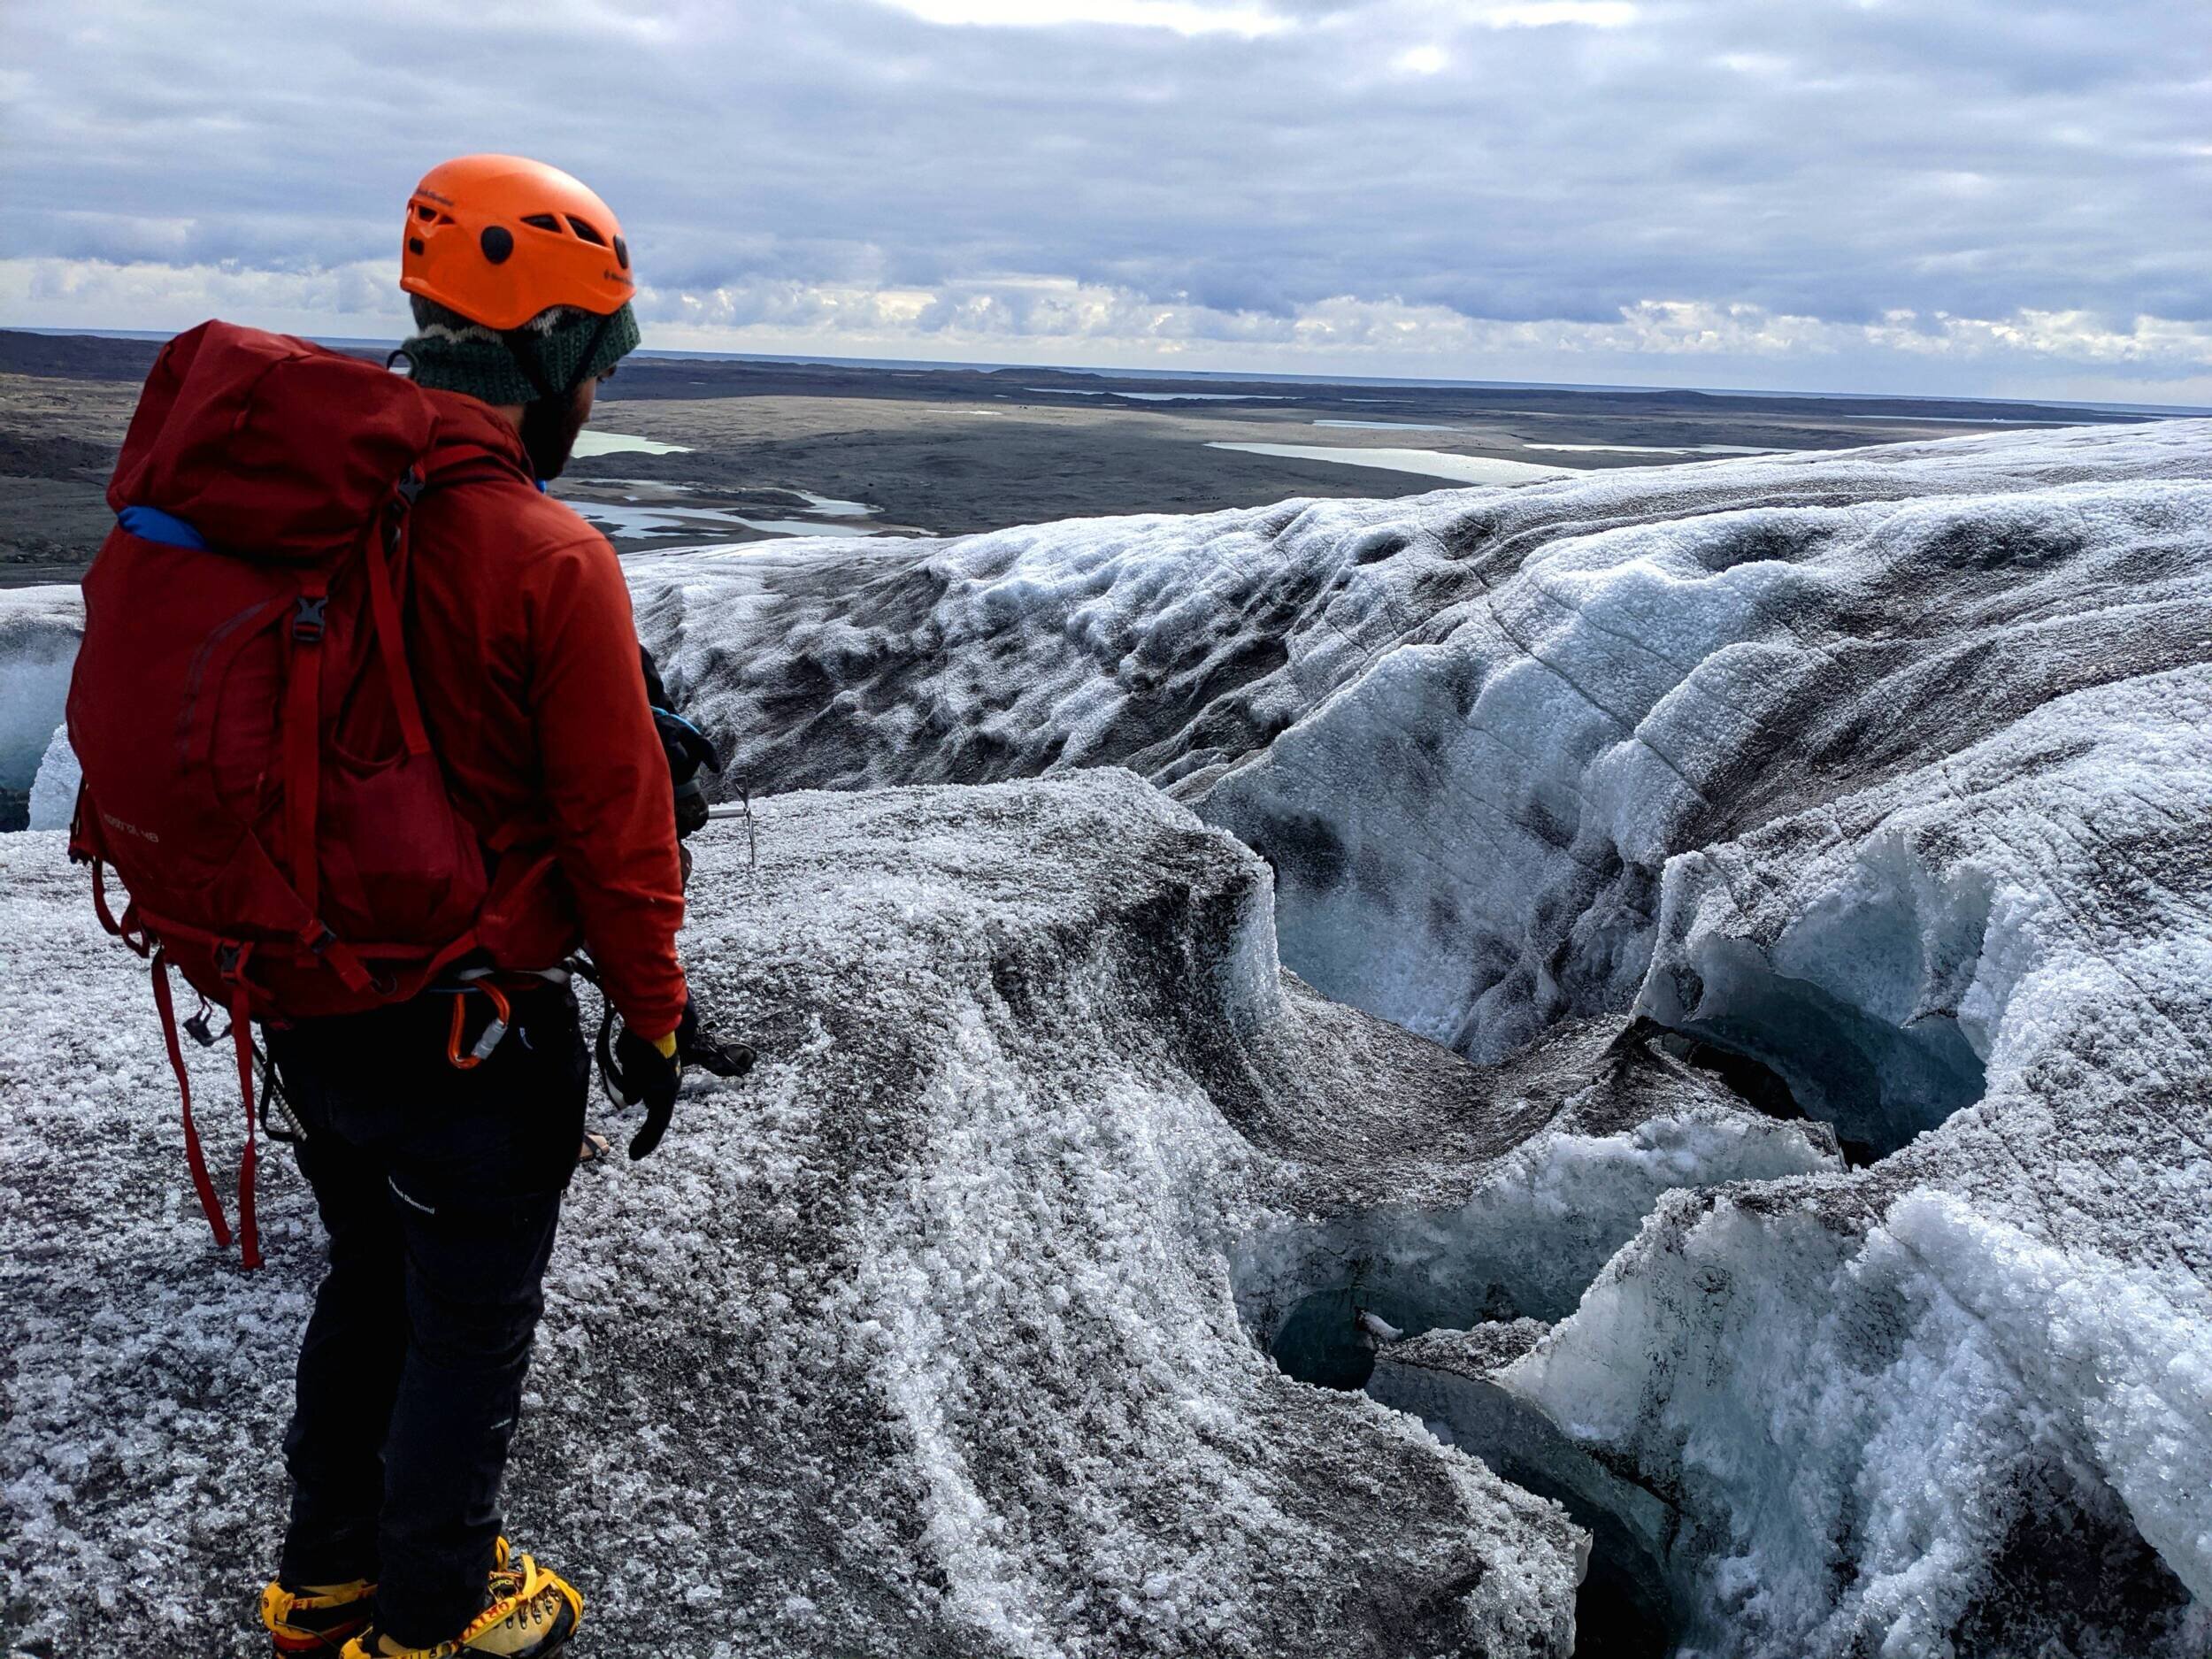 Get up close with a glacier and feel the changes.